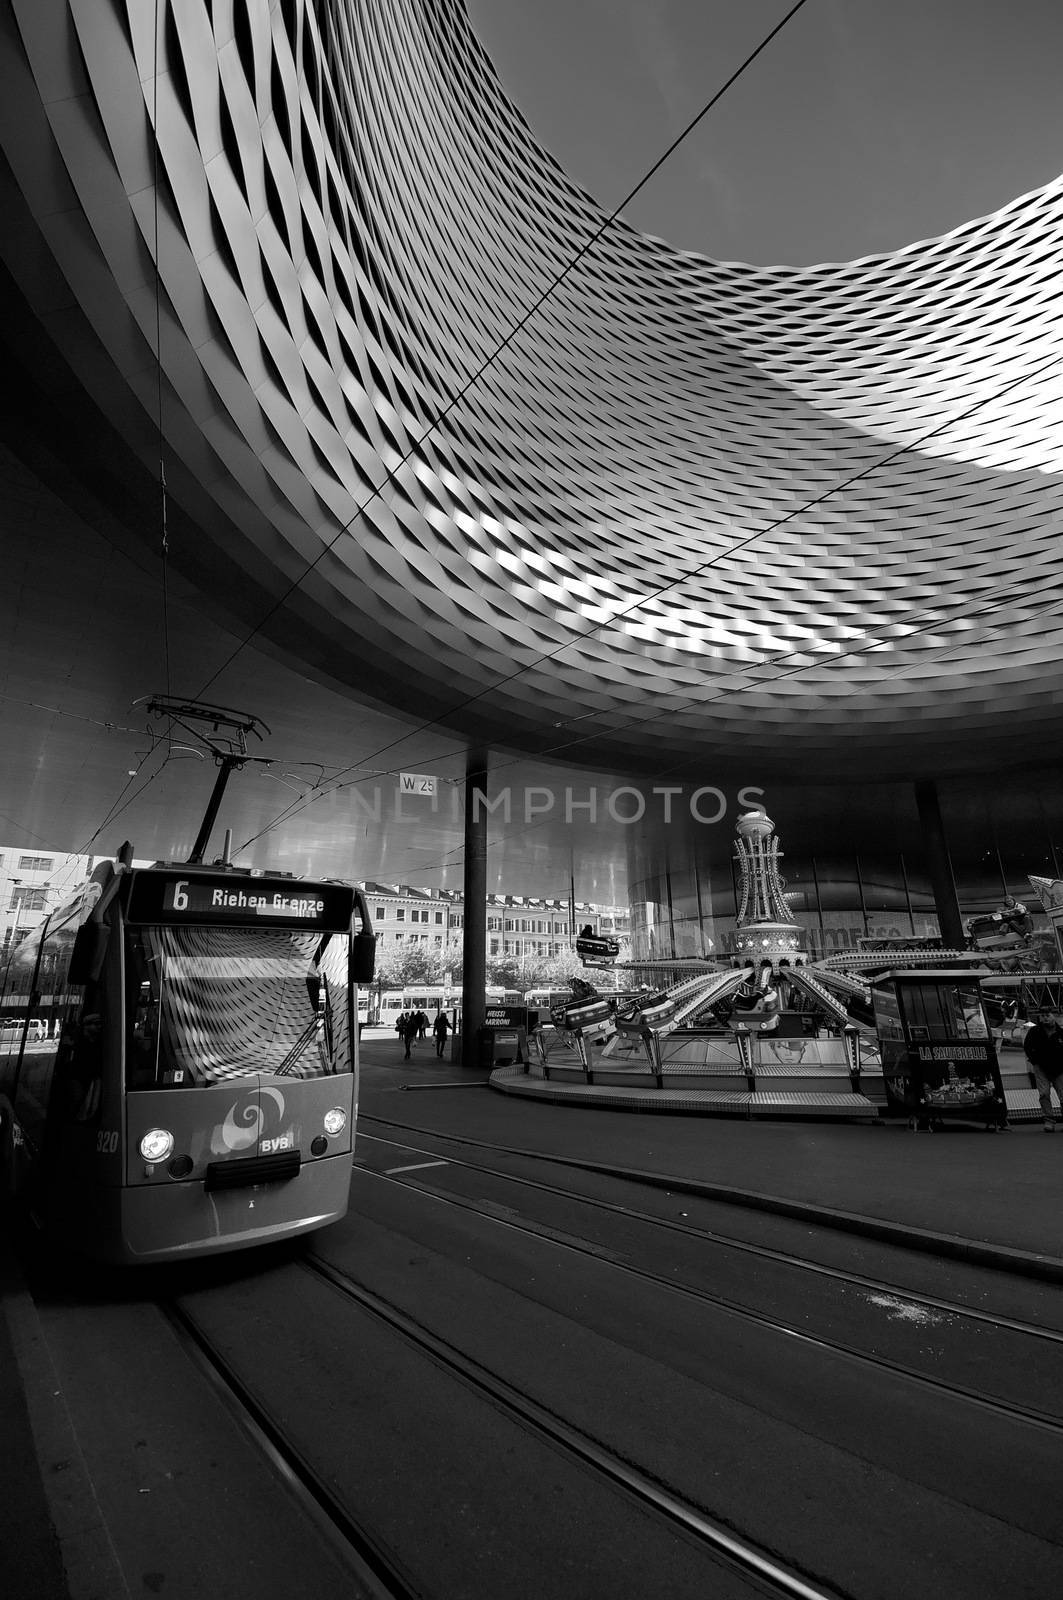 BASEL, SWITZERLAND - NOVEMBER 01 2014: Exhibition Center in the  by anderm